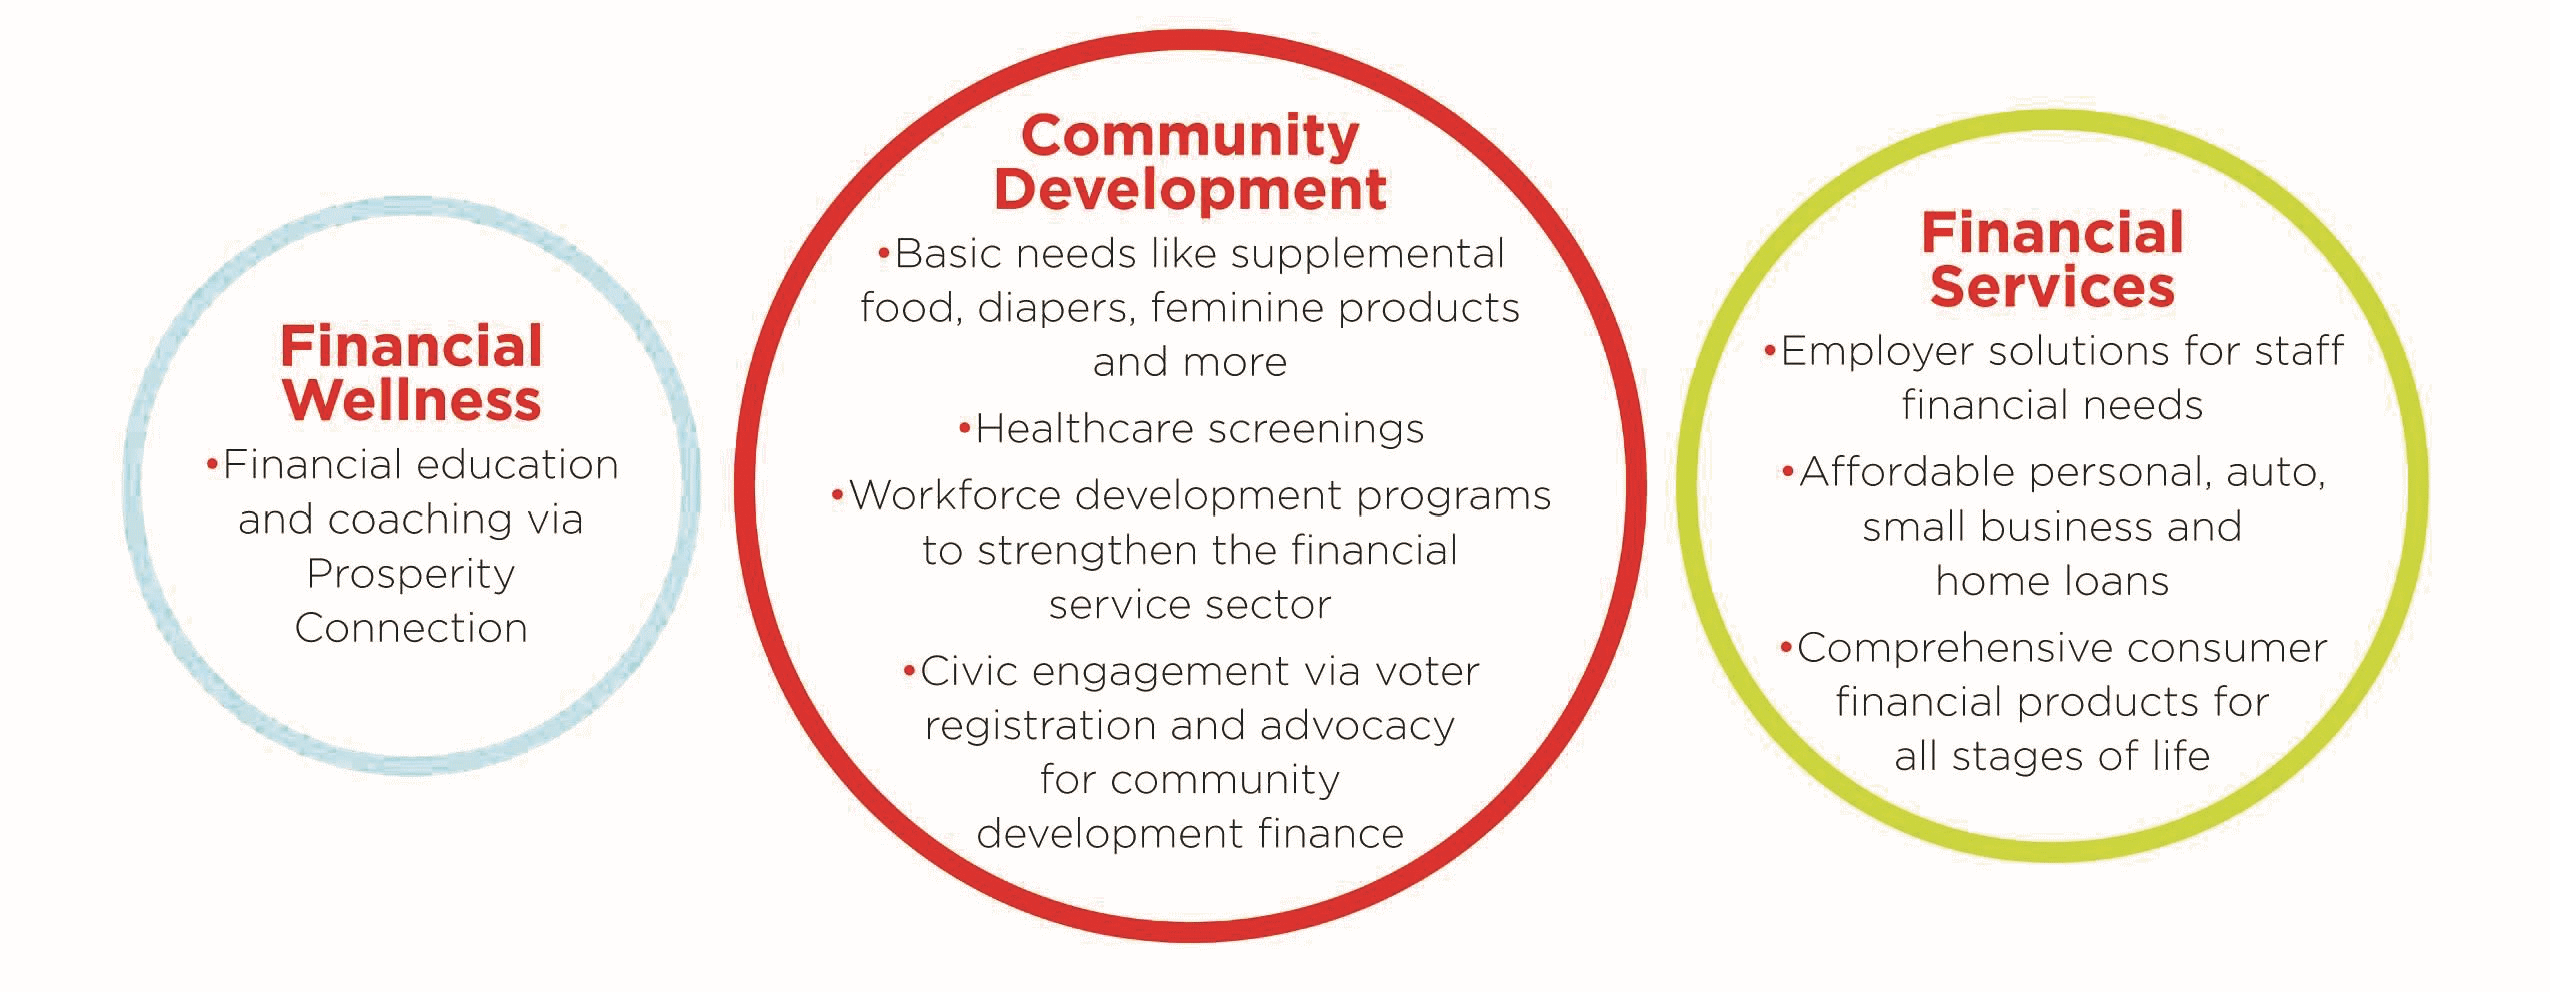 Financial Wellness, Community Development, and Financial Services circles.